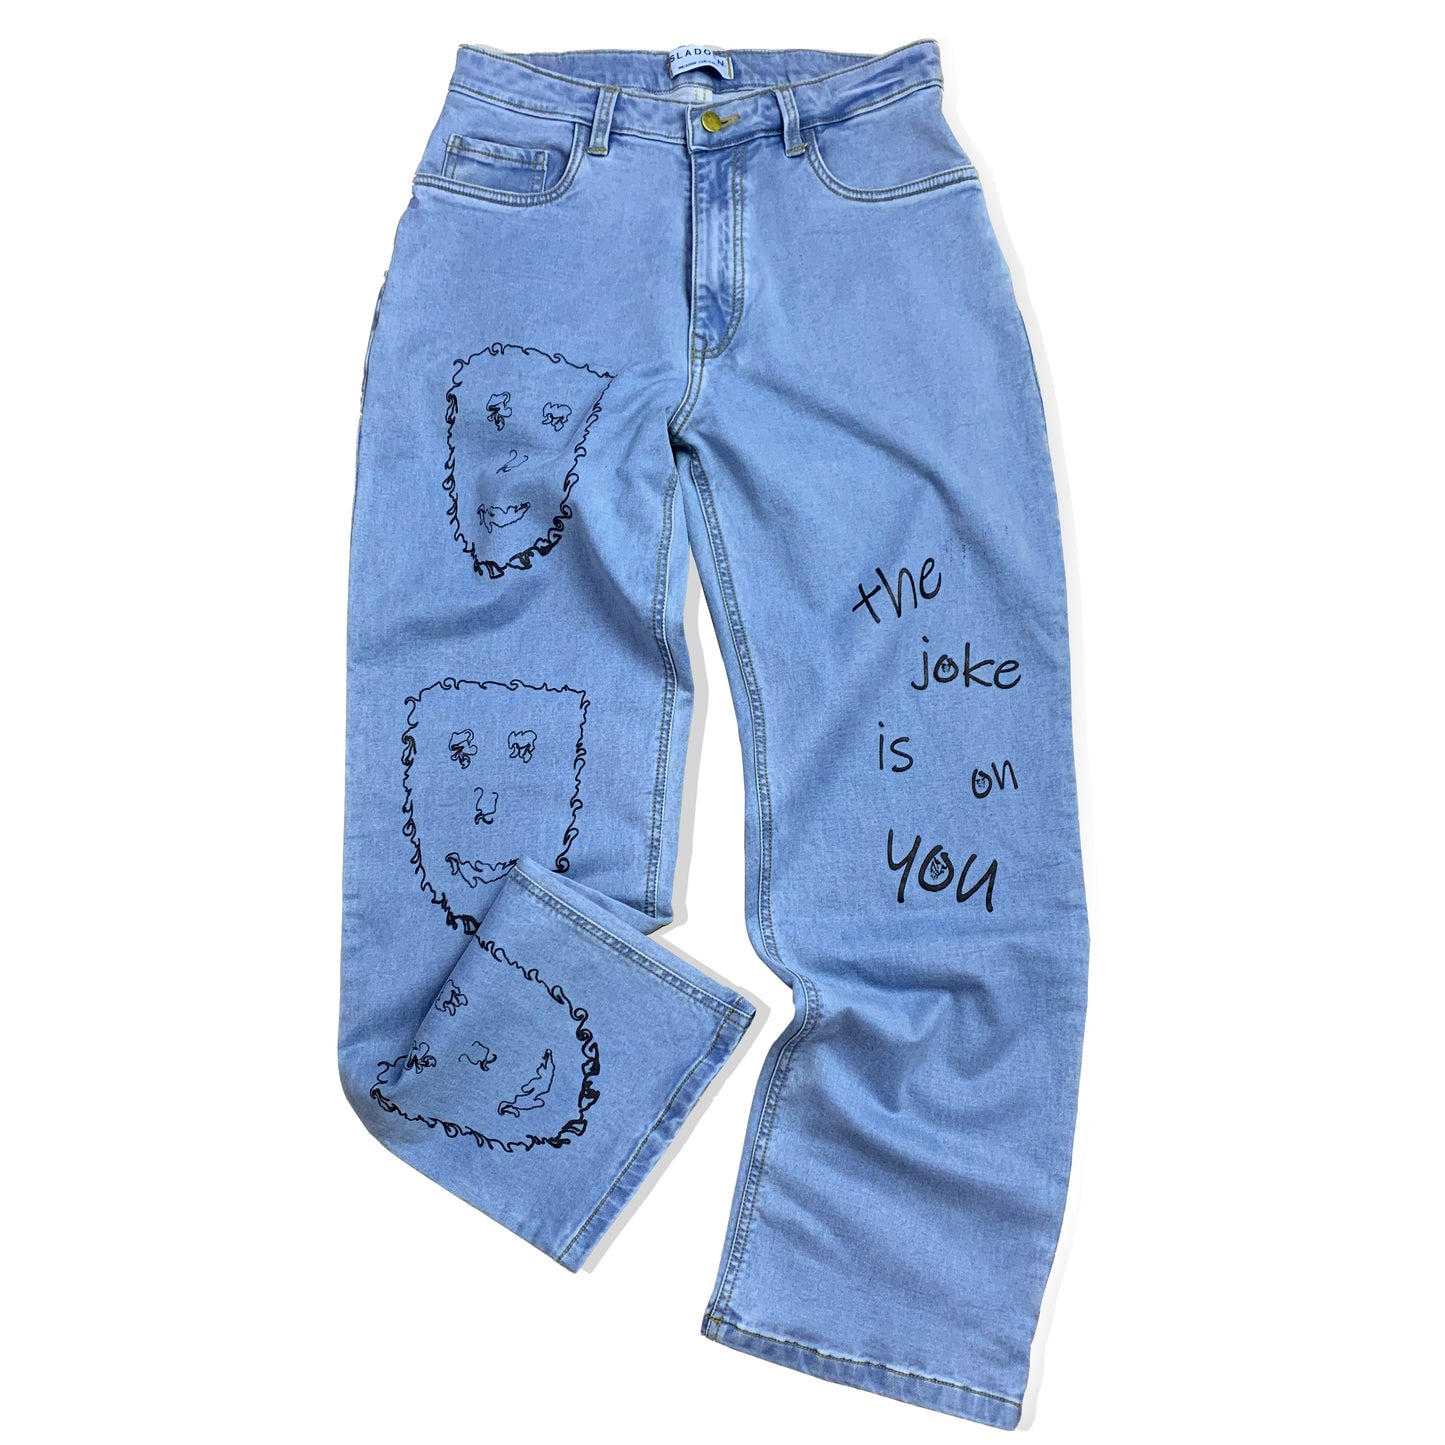 The Joke Is On You - Jeans